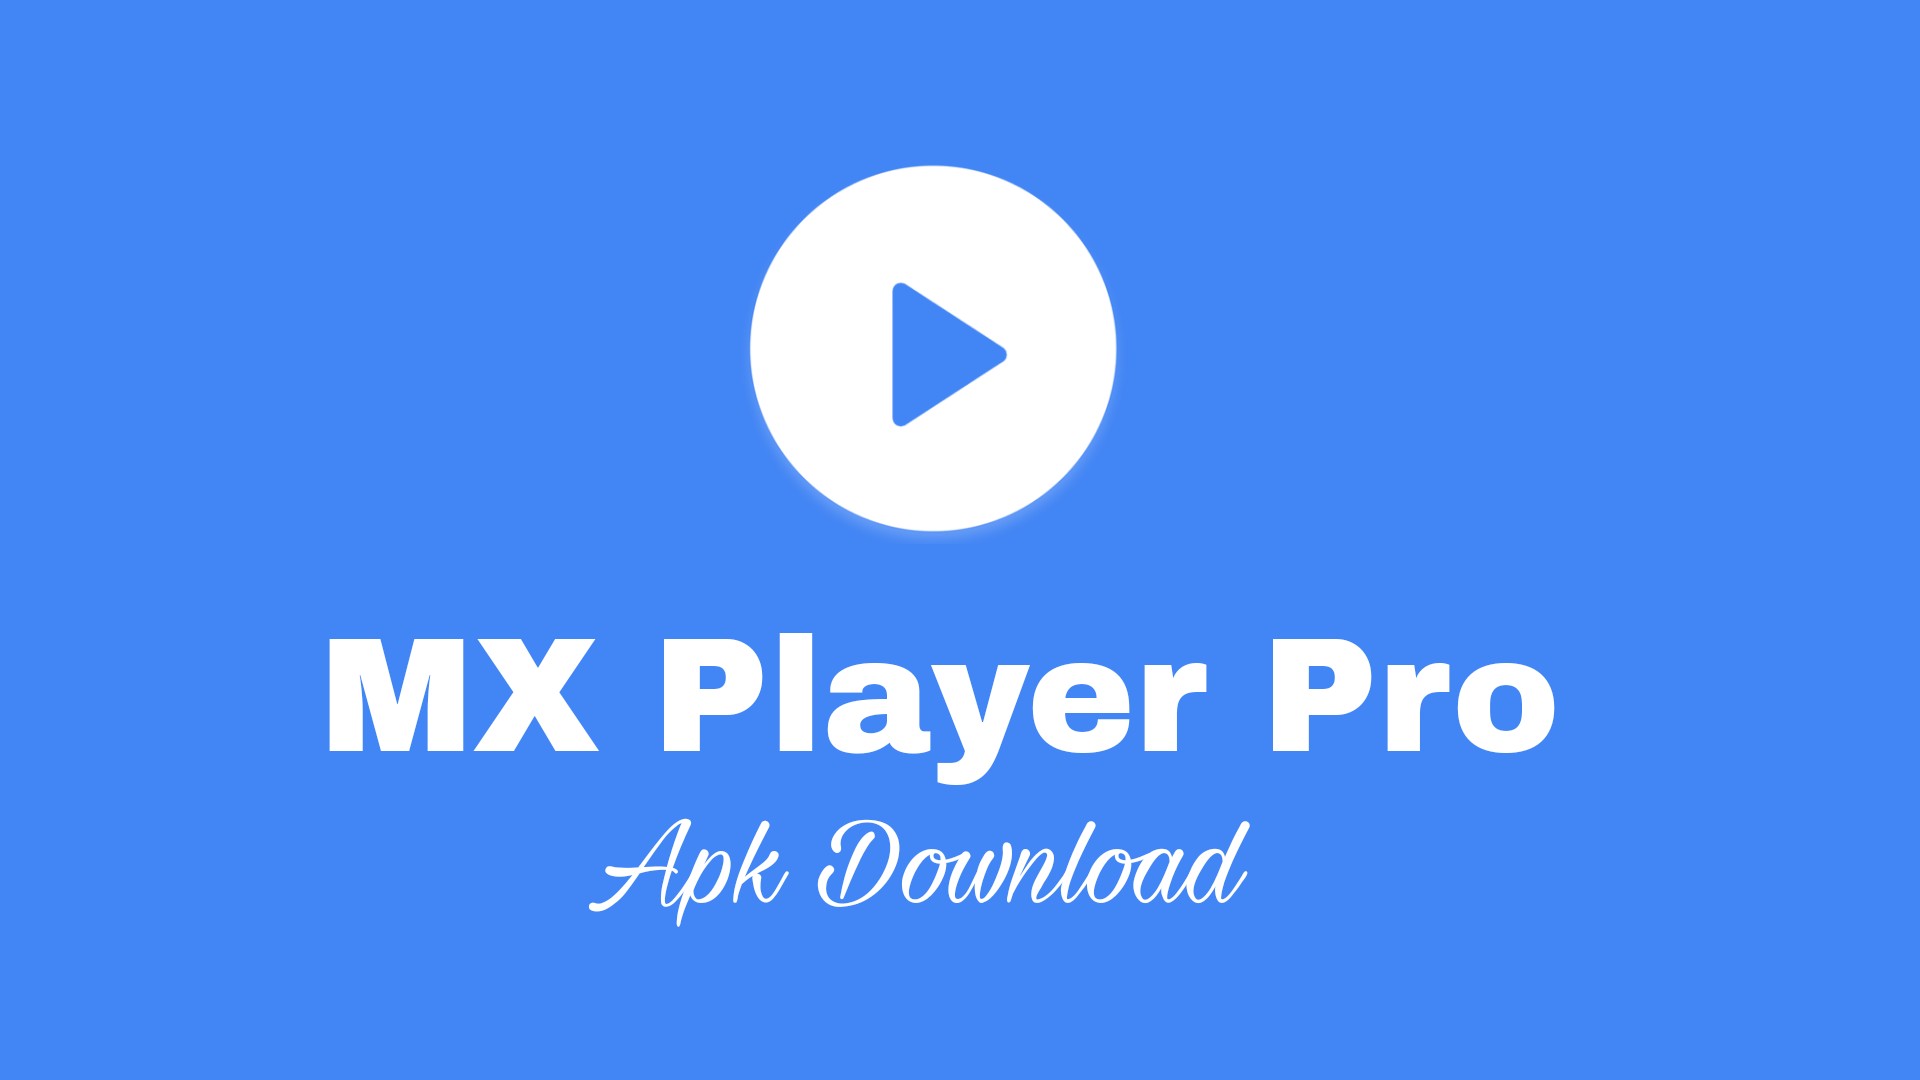 Download MX Player Pro APK for Android